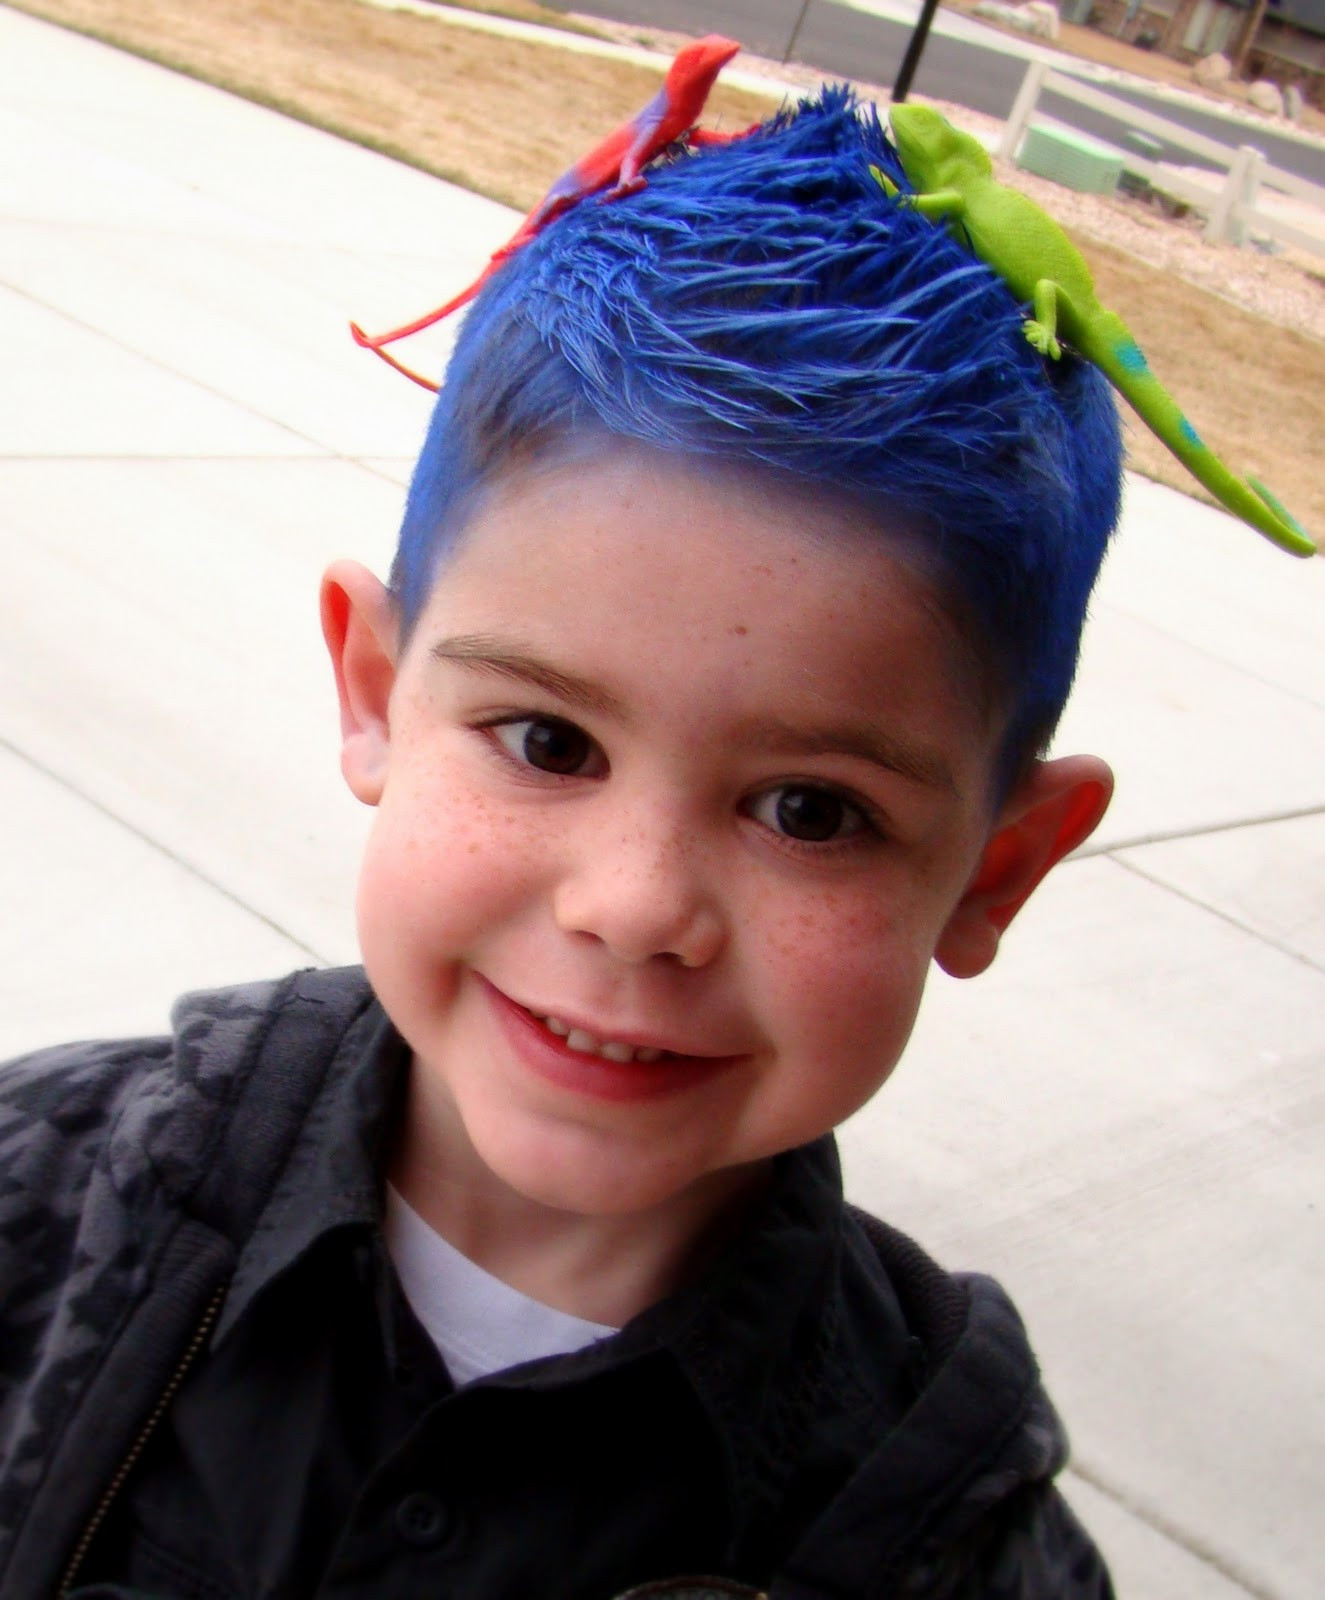 Crazy Hairstyles For Kids
 tHe fiCkLe piCkLe CraZy haIR DaY